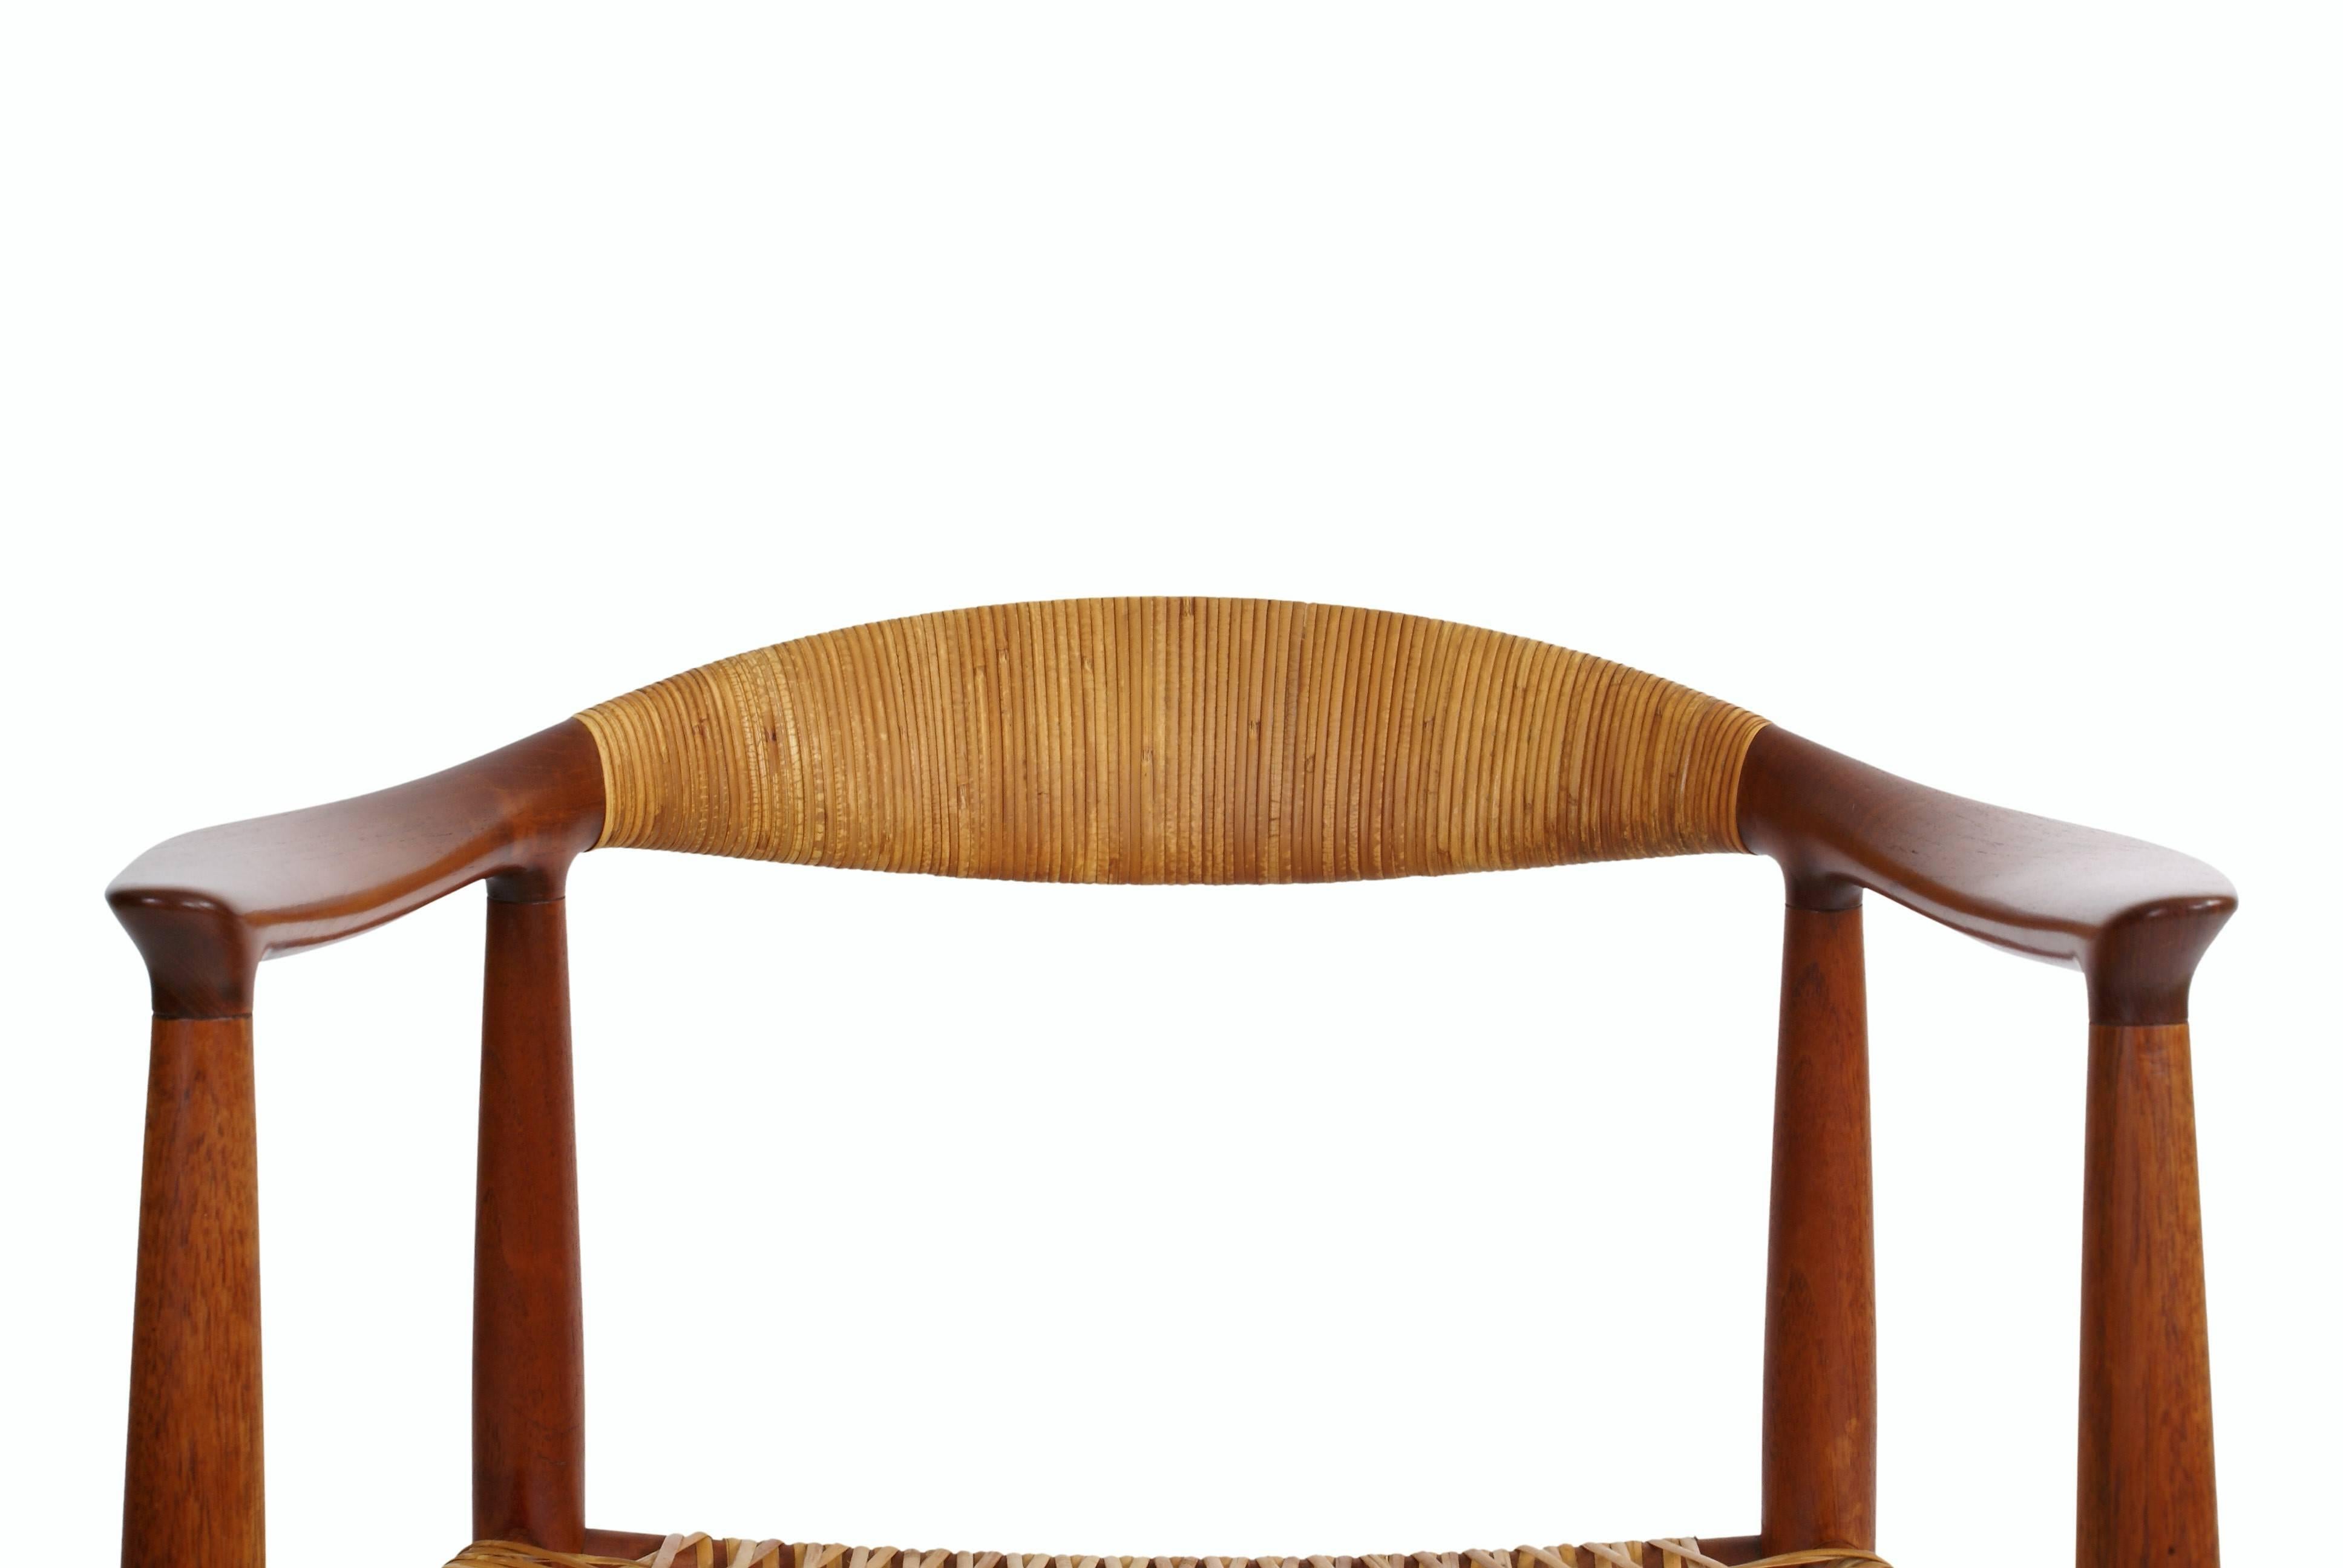 Hans Wegner 'The Chair' for master cabinetmaker Johannes Hansen, model JH503. Designed 1949. Teak and cane. Char stamped from maker. 

'The Chair' was first presented at the Copenhagen Cabinetmakers' 23th Guild Exhibition at The Danish Museum of